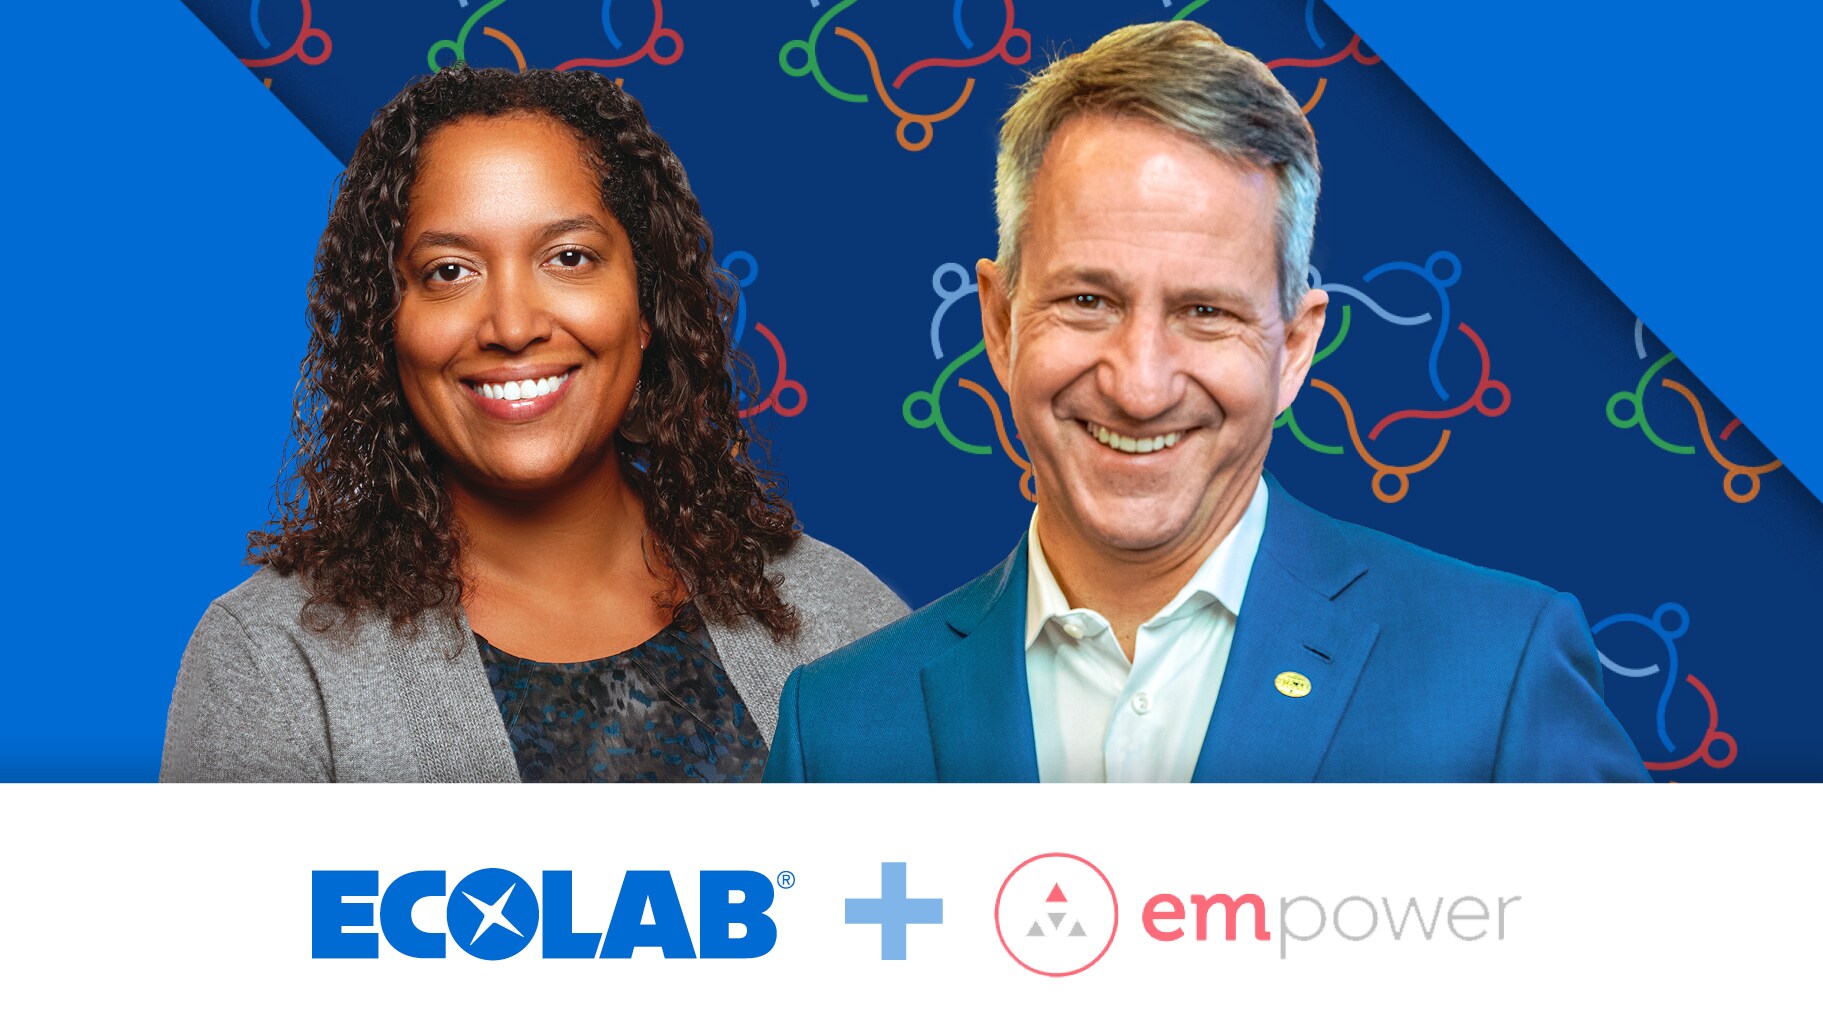 INvolve’s 2023 Empower Role Model List recipients, Ecolab’s Chairman and CEO Christophe Beck and Chief Marketing Officer Gail Peterson